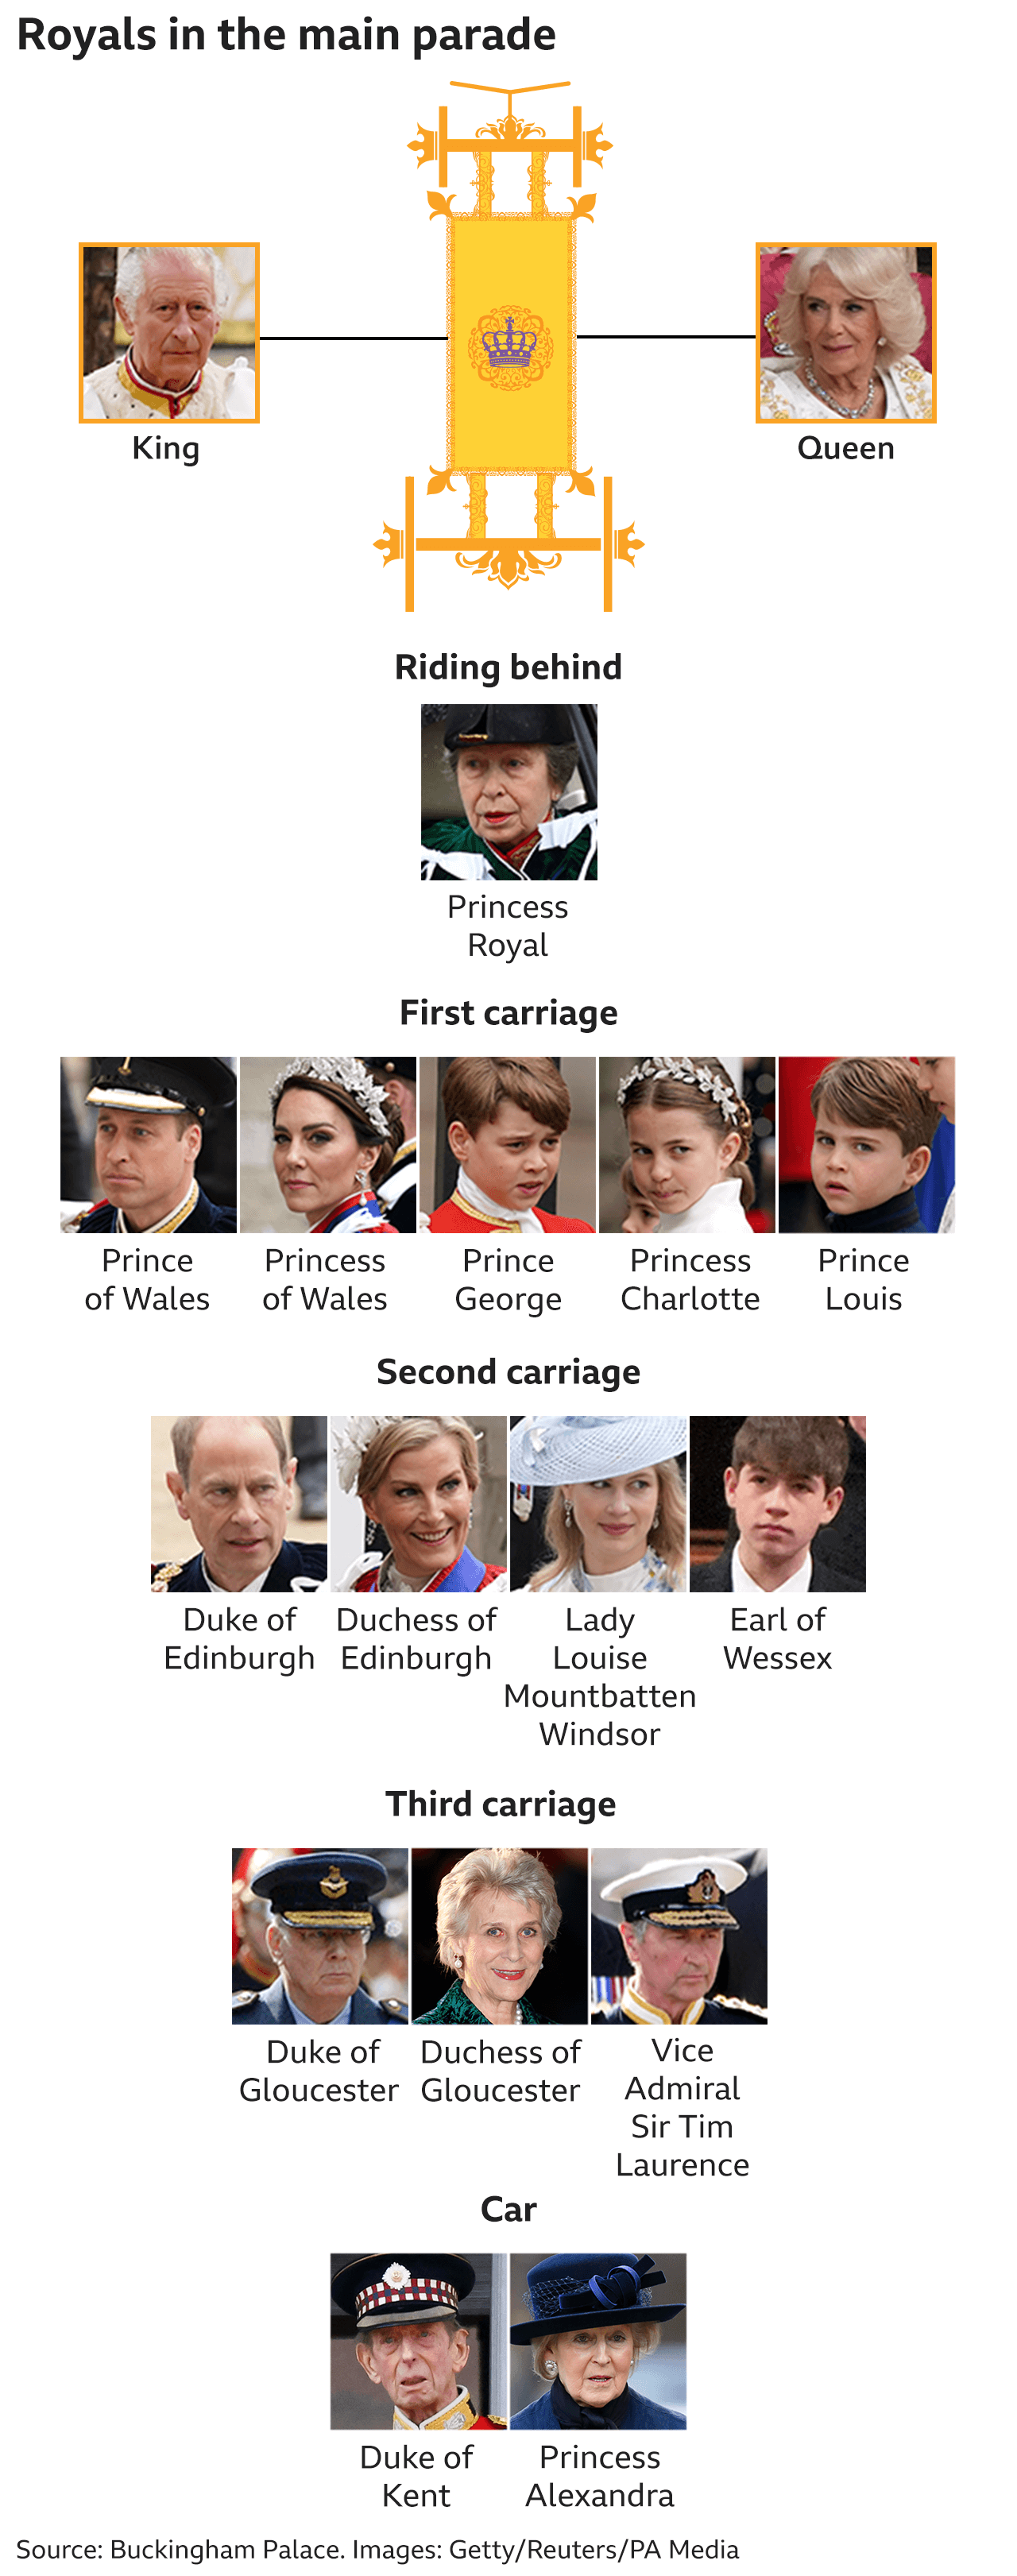 Graphic showing which royals took part in the main procession, with the King and Queen in the Gold State Coach, the Princess Royal riding behind them, the Prince and Princess of Wales and their three children in the first carriage, the Duke and Duchess of Edinburgh and their two children in the second carriage, the Duke and Duchess of Gloucester with Vice Admiral Sir Tim Laurence in the third carriage and the Duke of Kent and Princess Alexandra in a car behind them